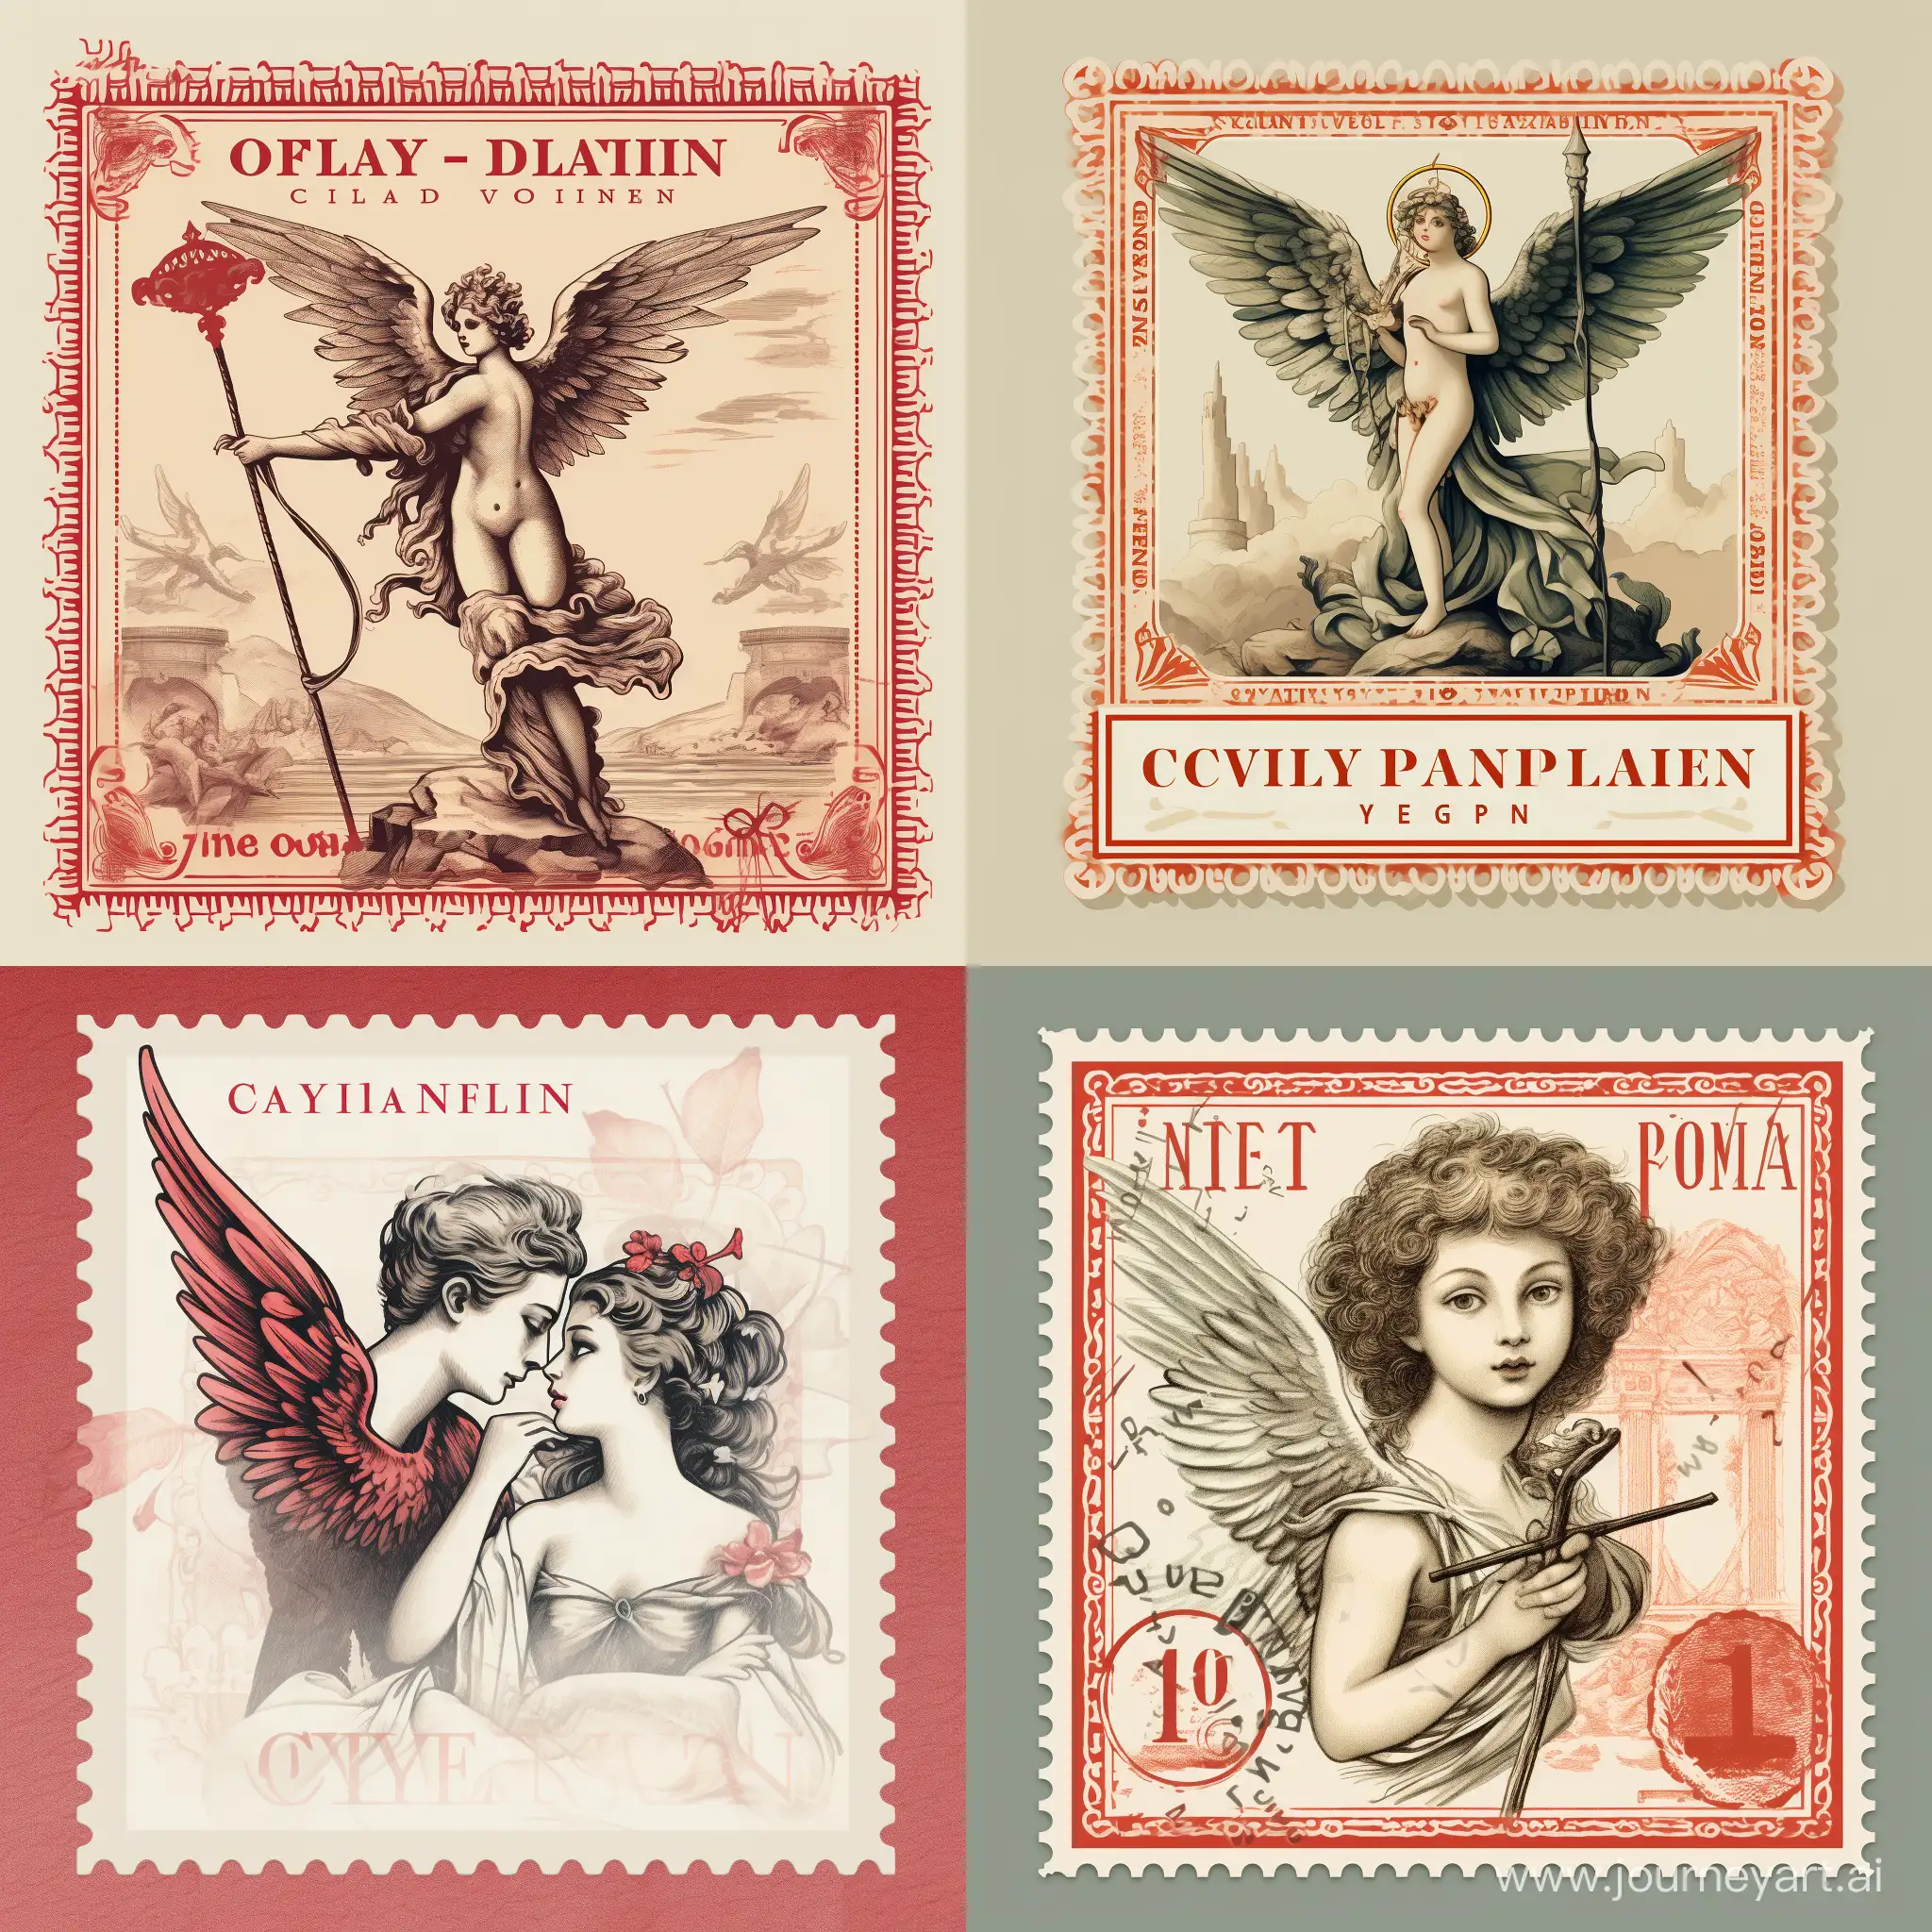 Valentines-Day-Cupid-Stamps-Collection